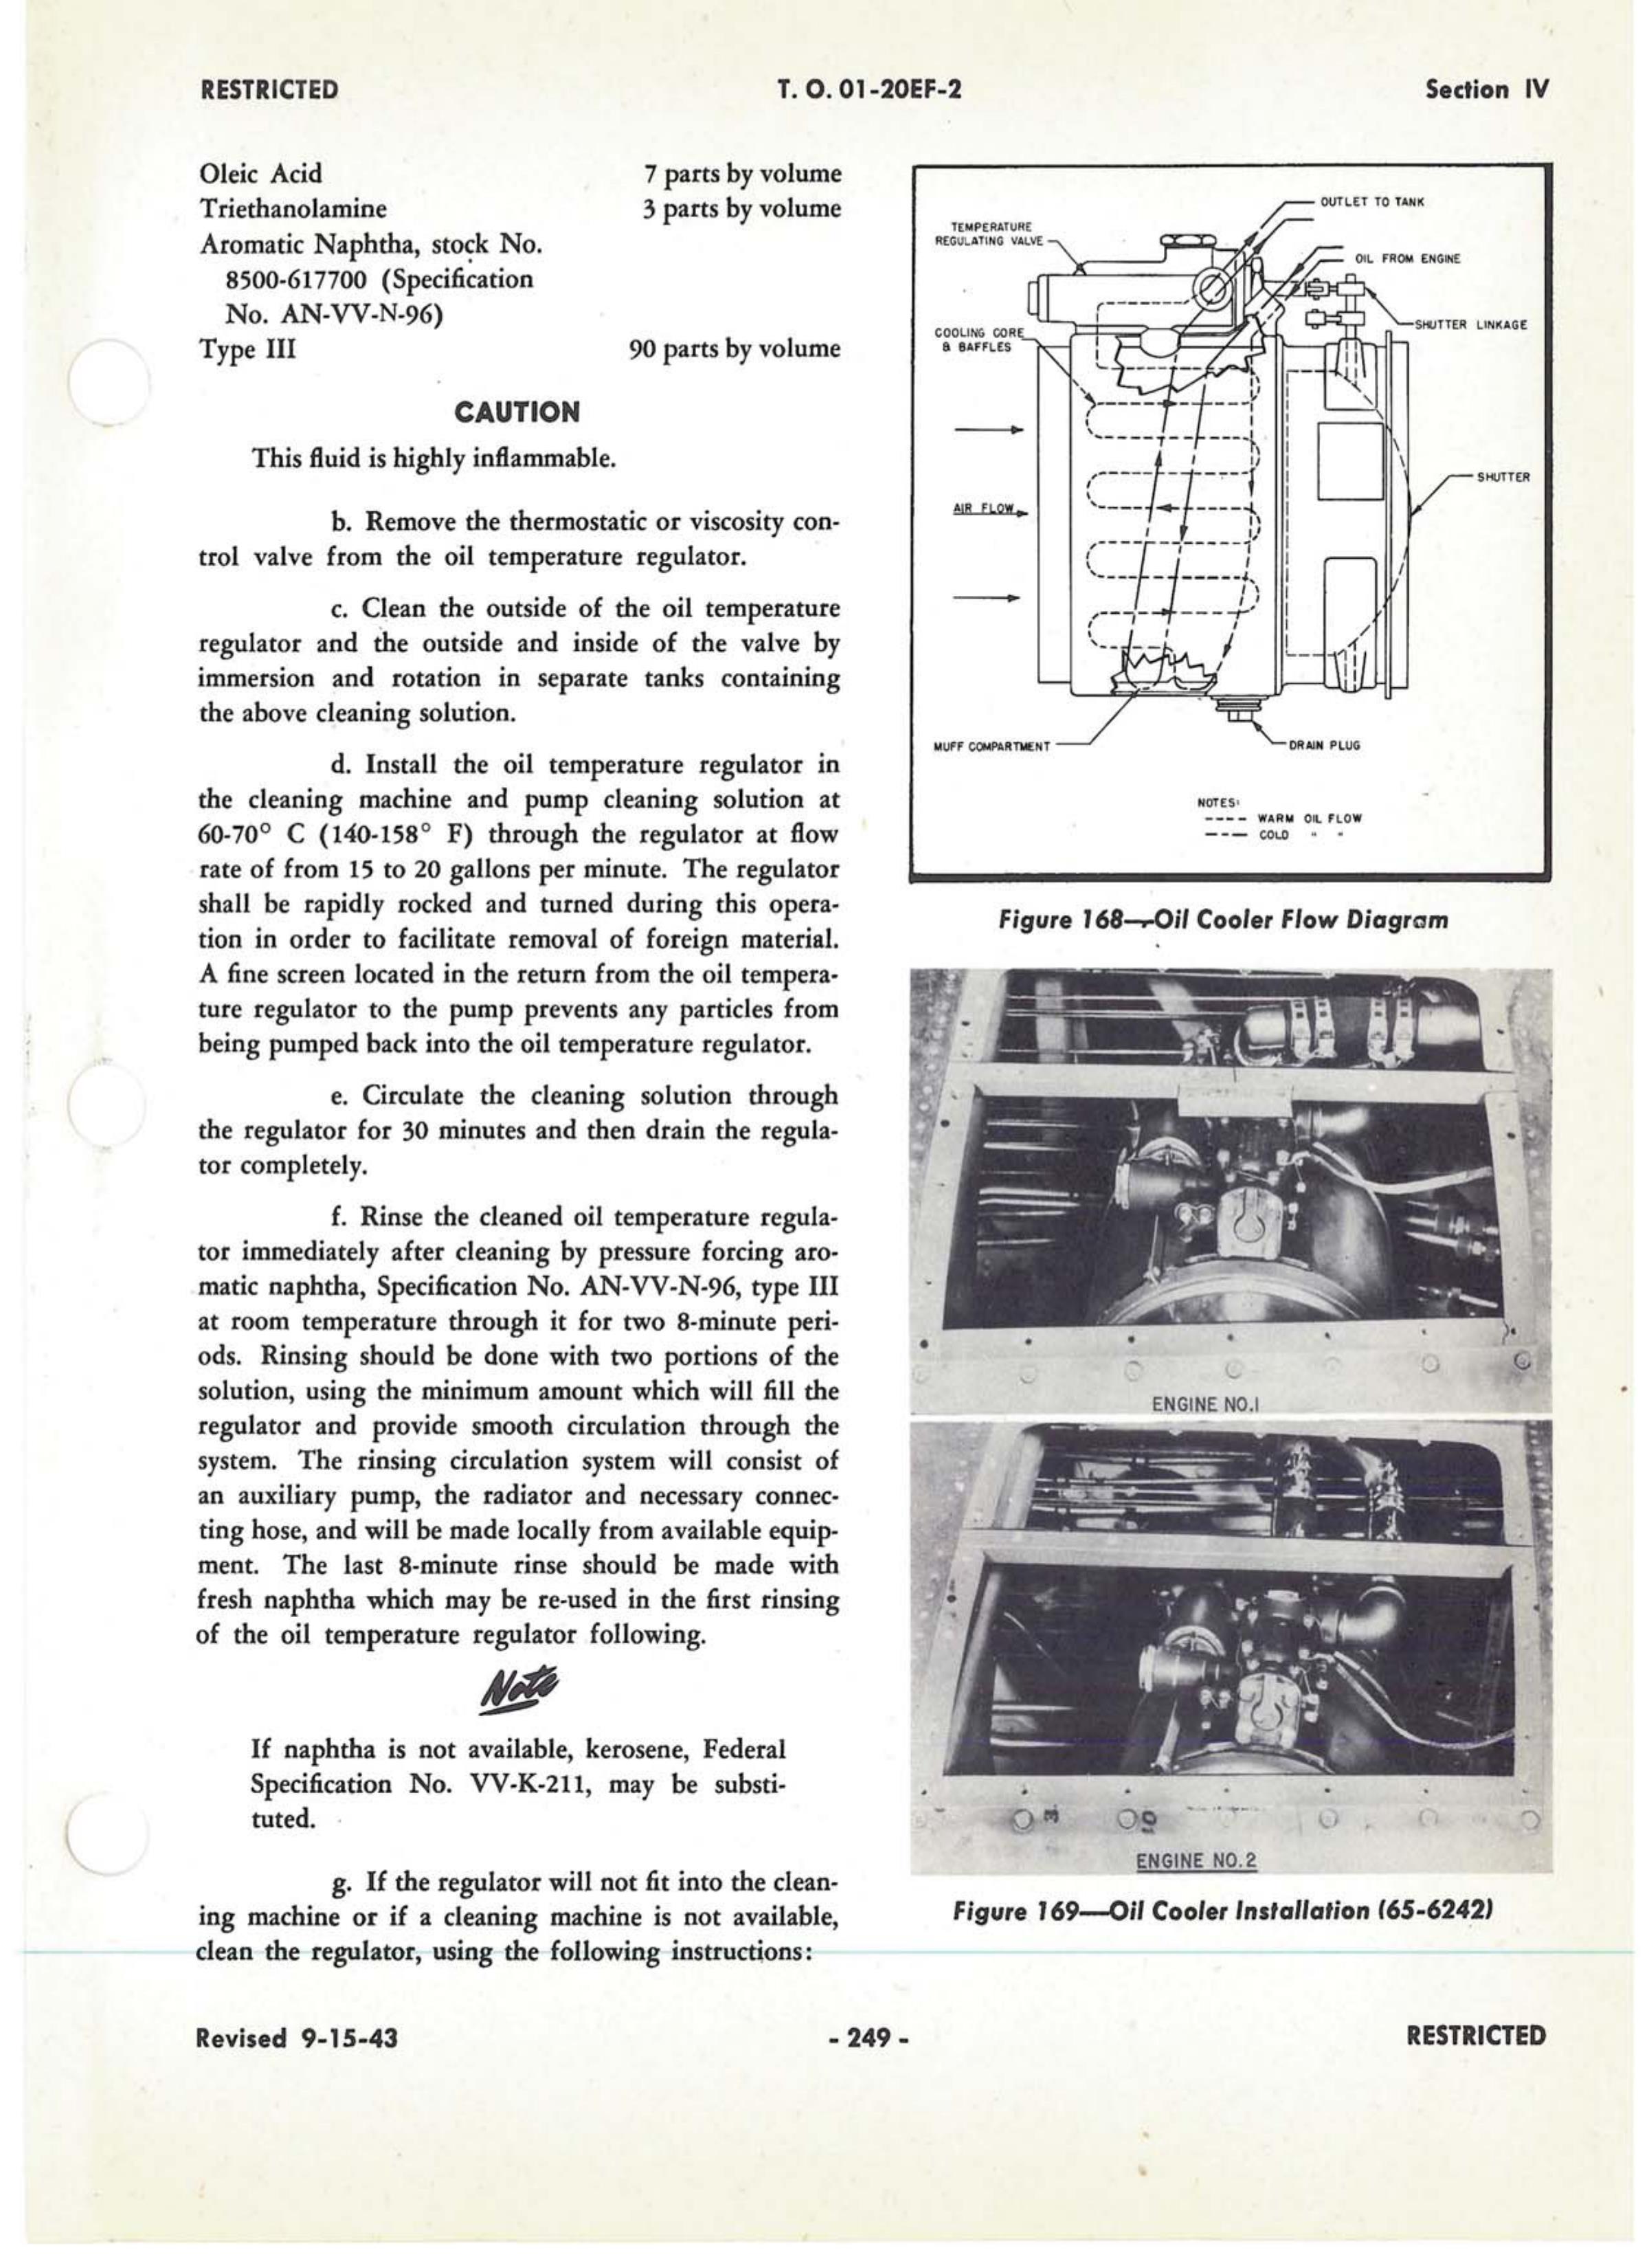 Sample page 267 from AirCorps Library document: Erection & Maintenance - B-17F - Sept 1943